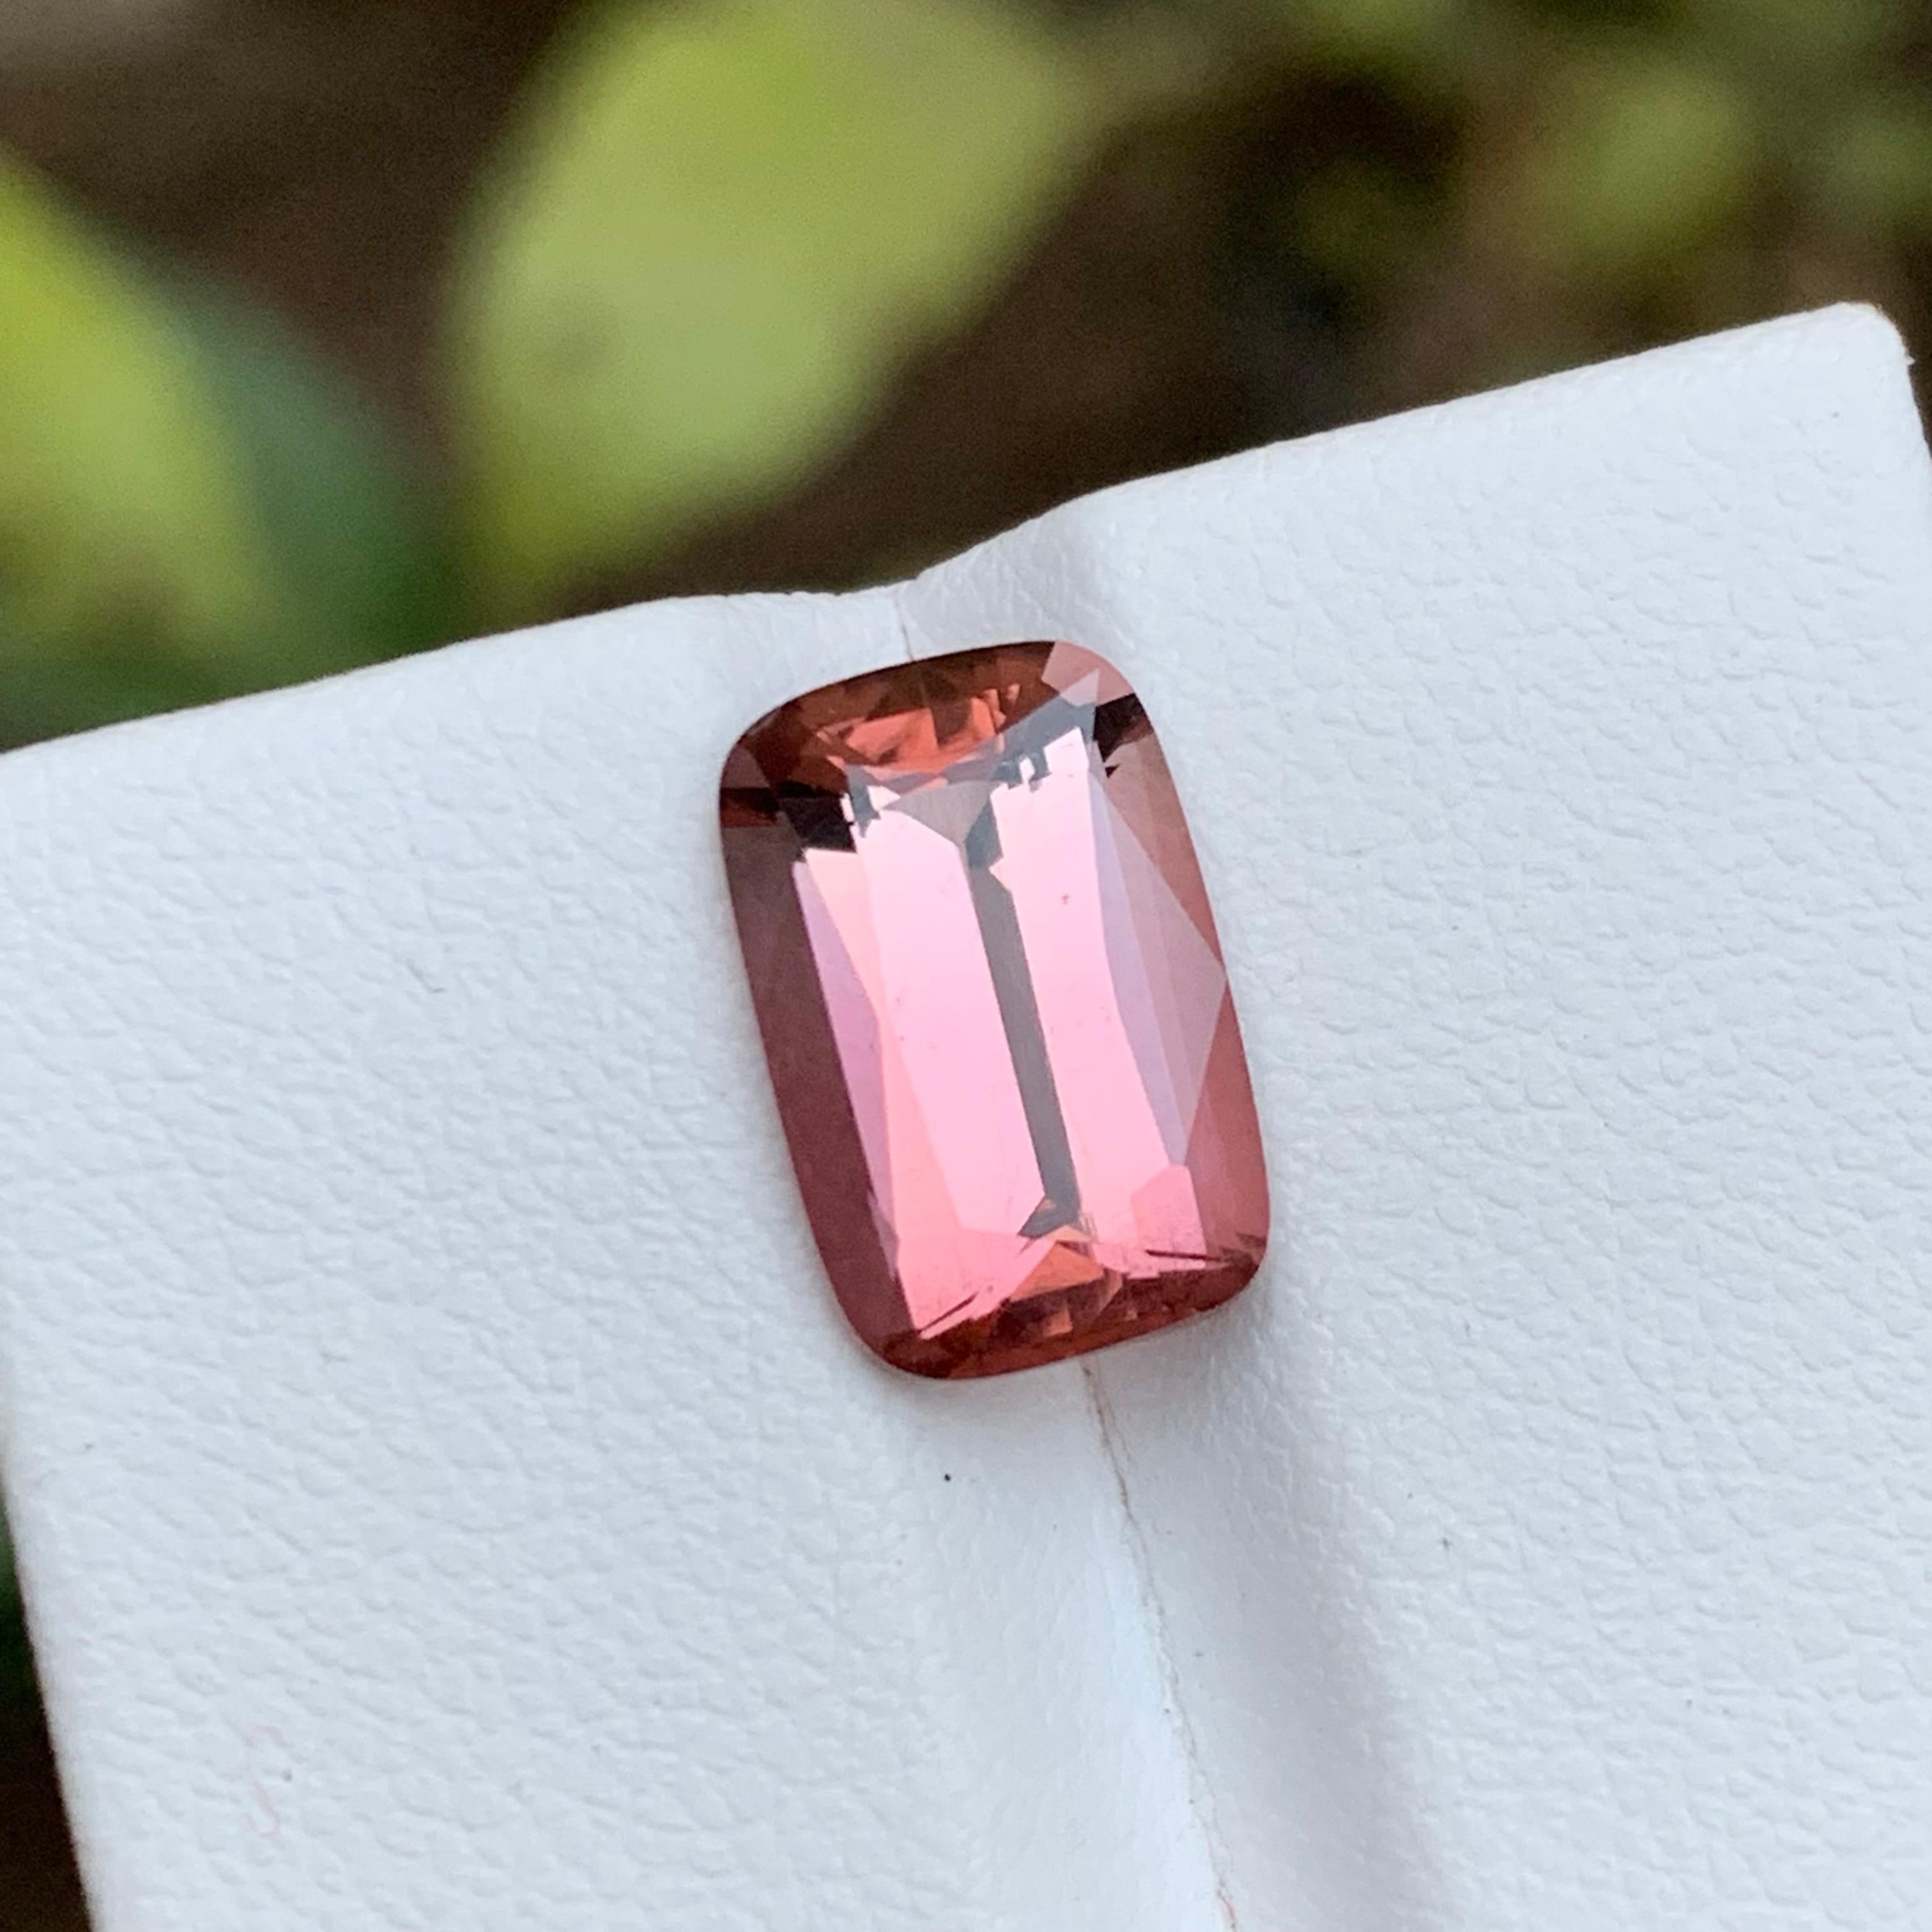 Contemporary Rare Pink Natural Tourmaline Gemstone 4Ct Brilliant Cushion Cut for Ring/Pendant For Sale